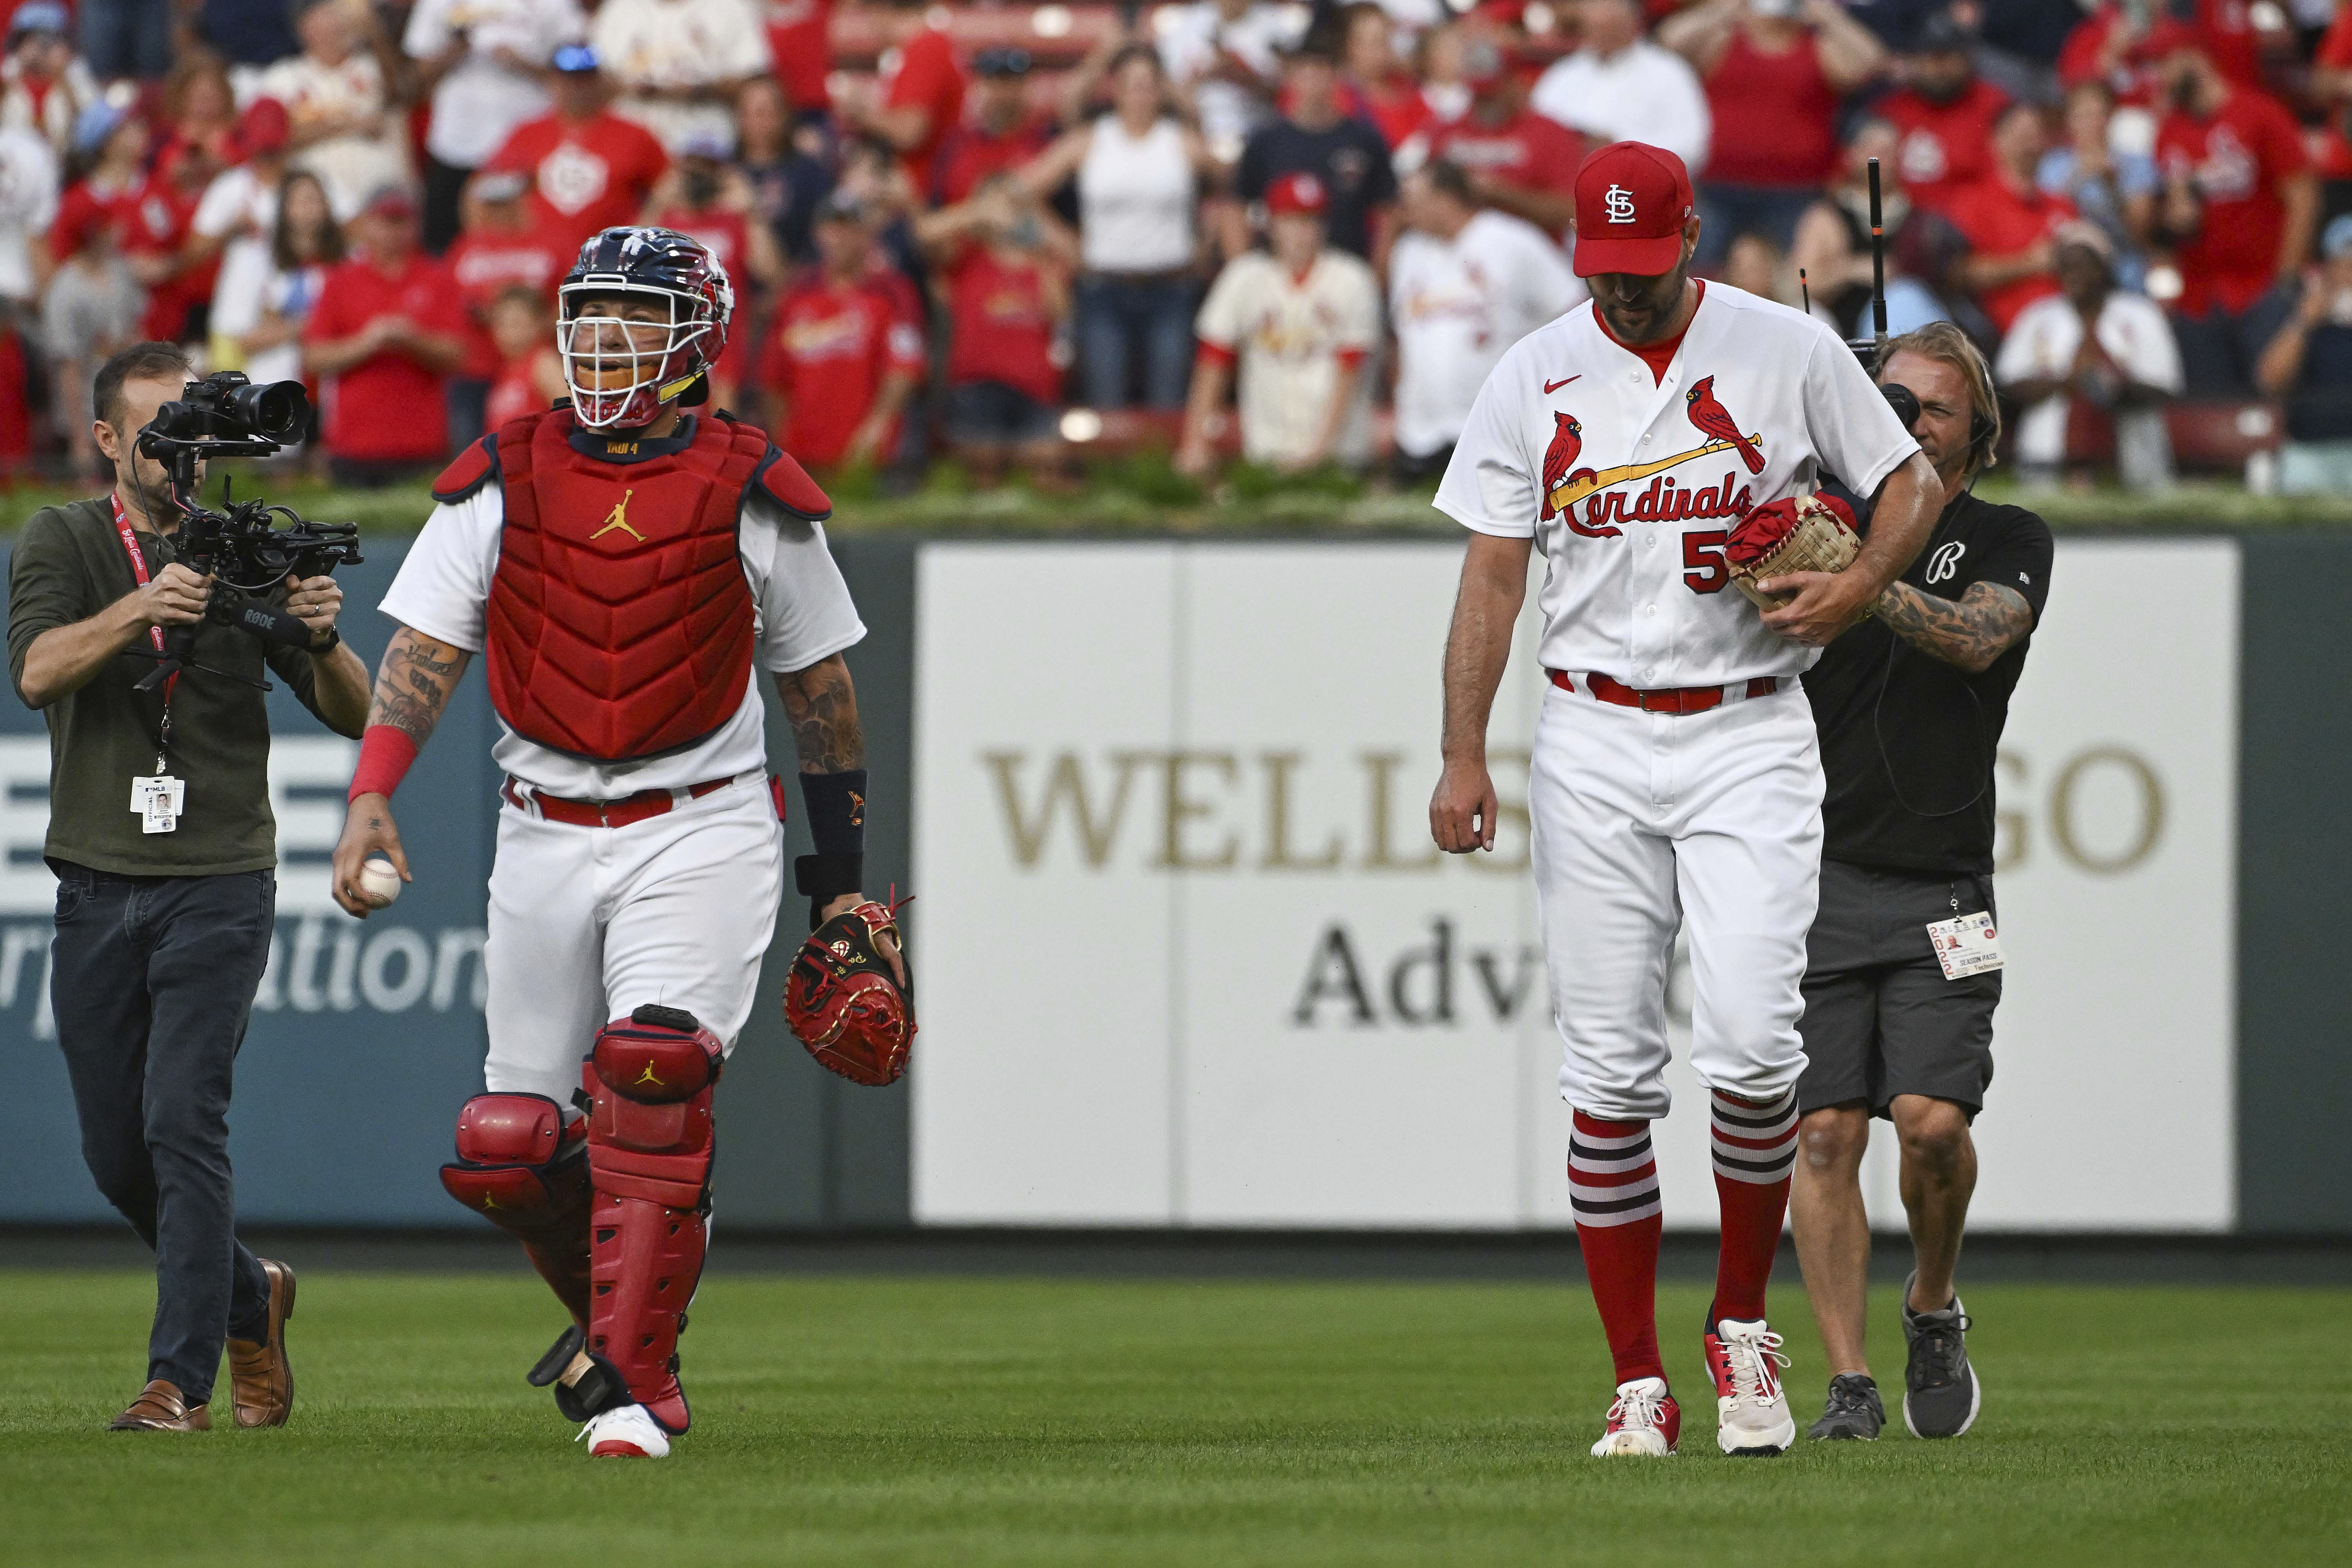 Kolten Wong of the Milwaukee Brewers reacts after hitting a lead